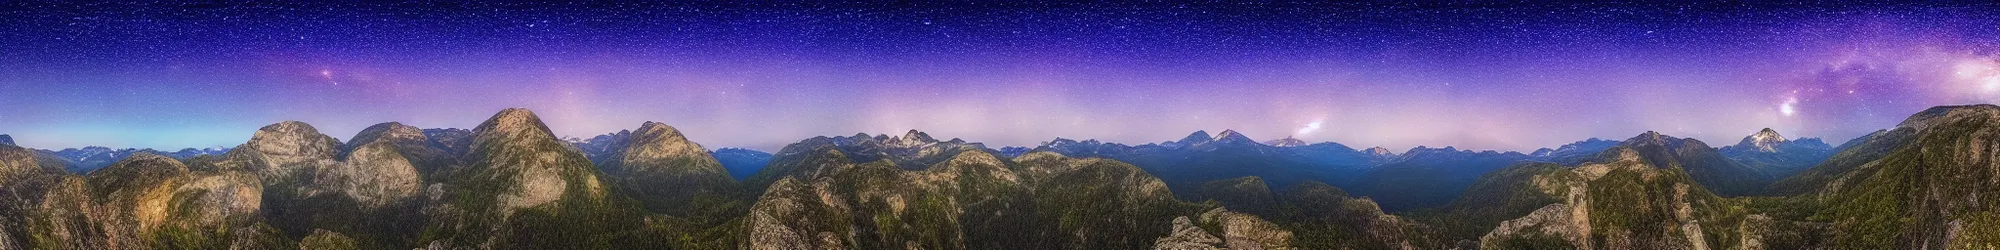 Prompt: panorama view of mountains and grand crayons at night with stars and galaxies in the night sky